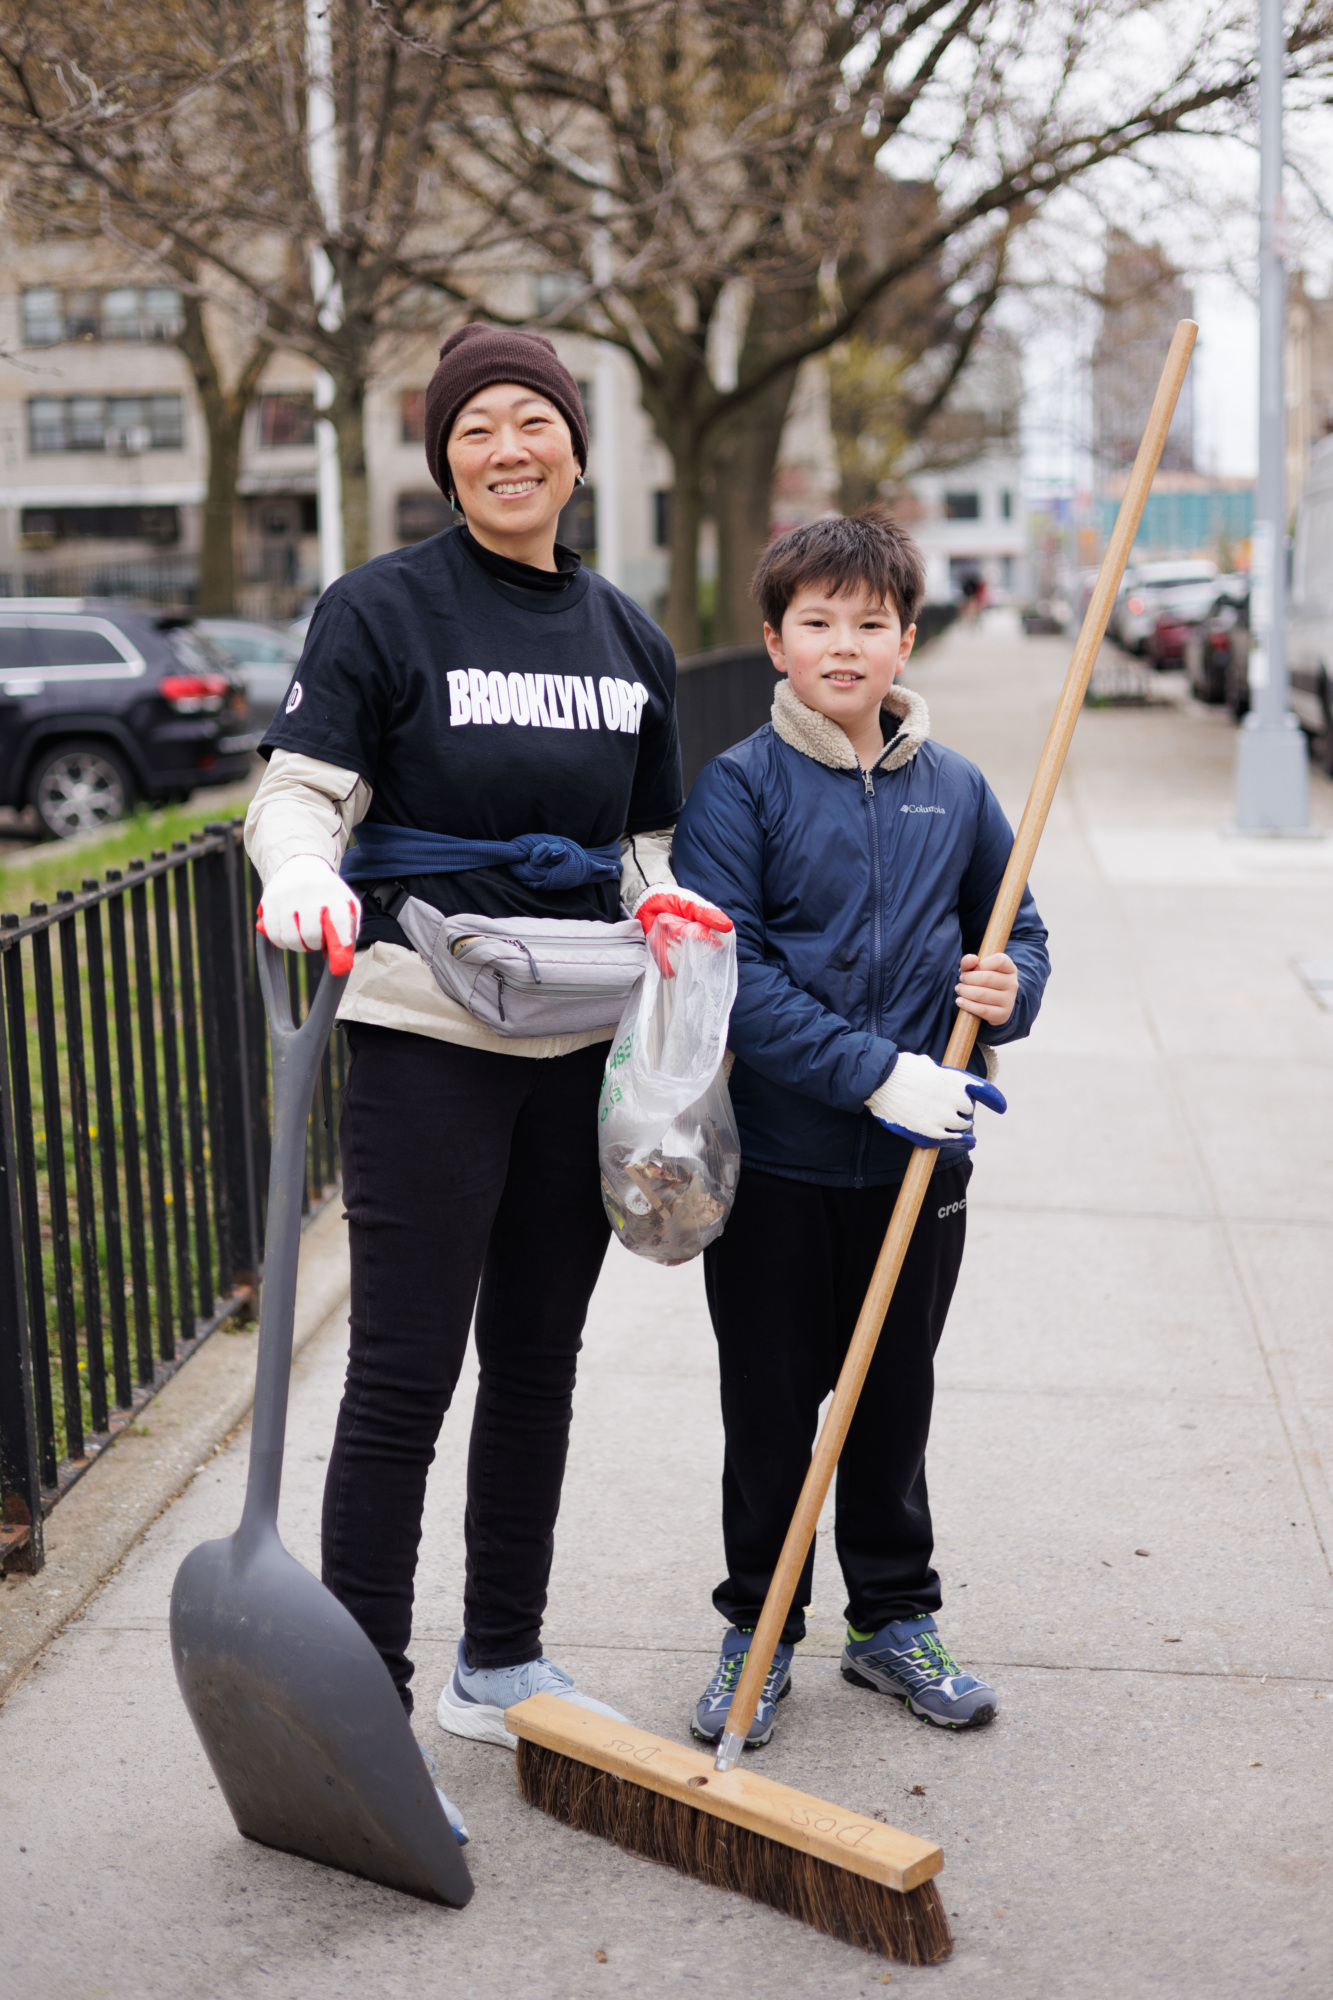 A woman and a young boy, both smiling, hold cleaning tools while participating in a community clean-up event in brooklyn.